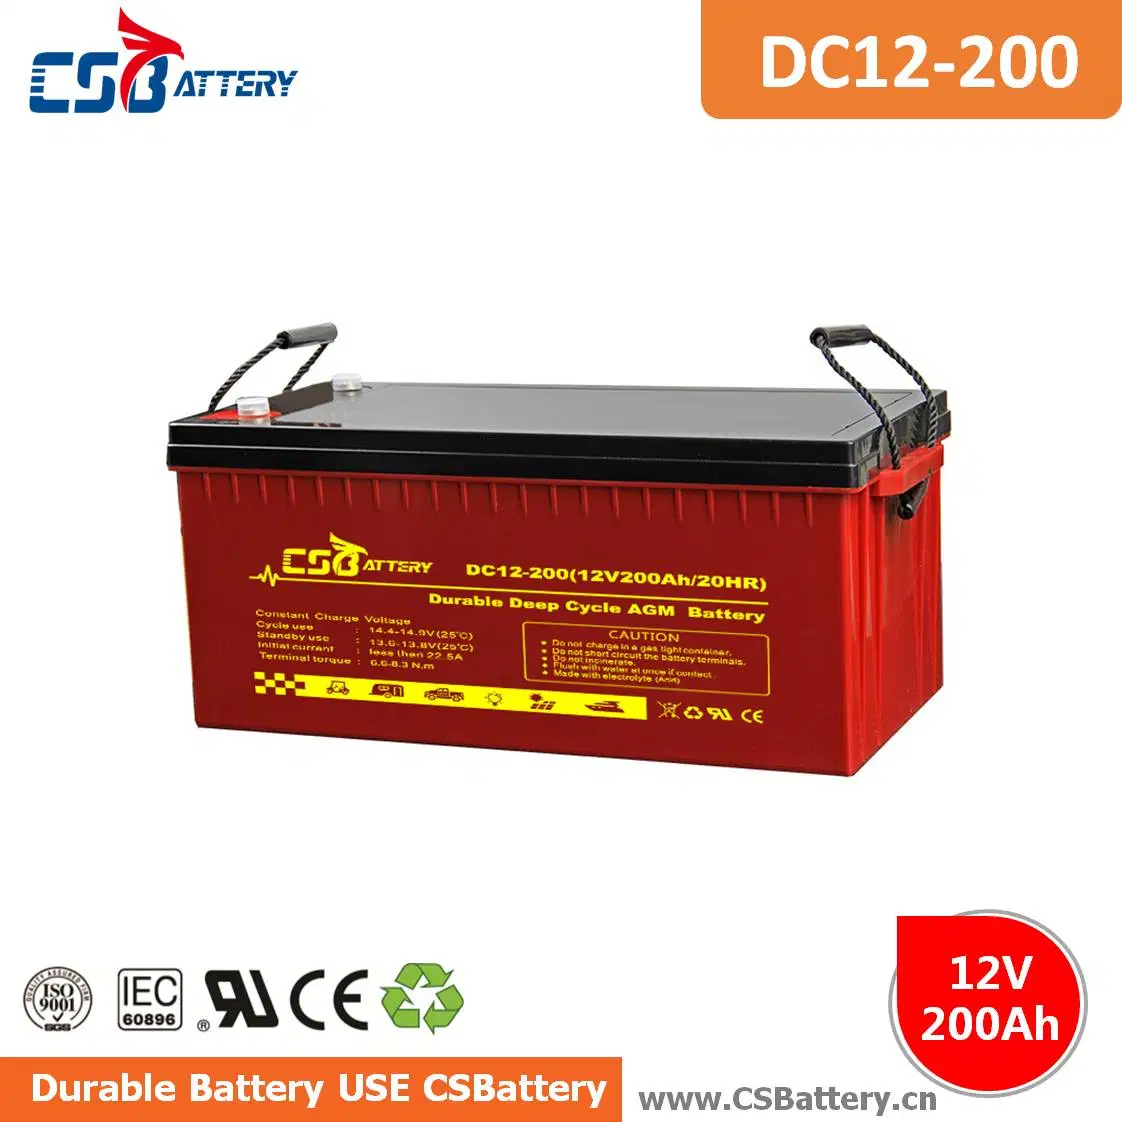 Csbattery 12V200ah Deep Cycle AGM Battery for Bts-Stations/Automotive/Pond-Fountain-Pumps/Buggies/Forklift/Csn